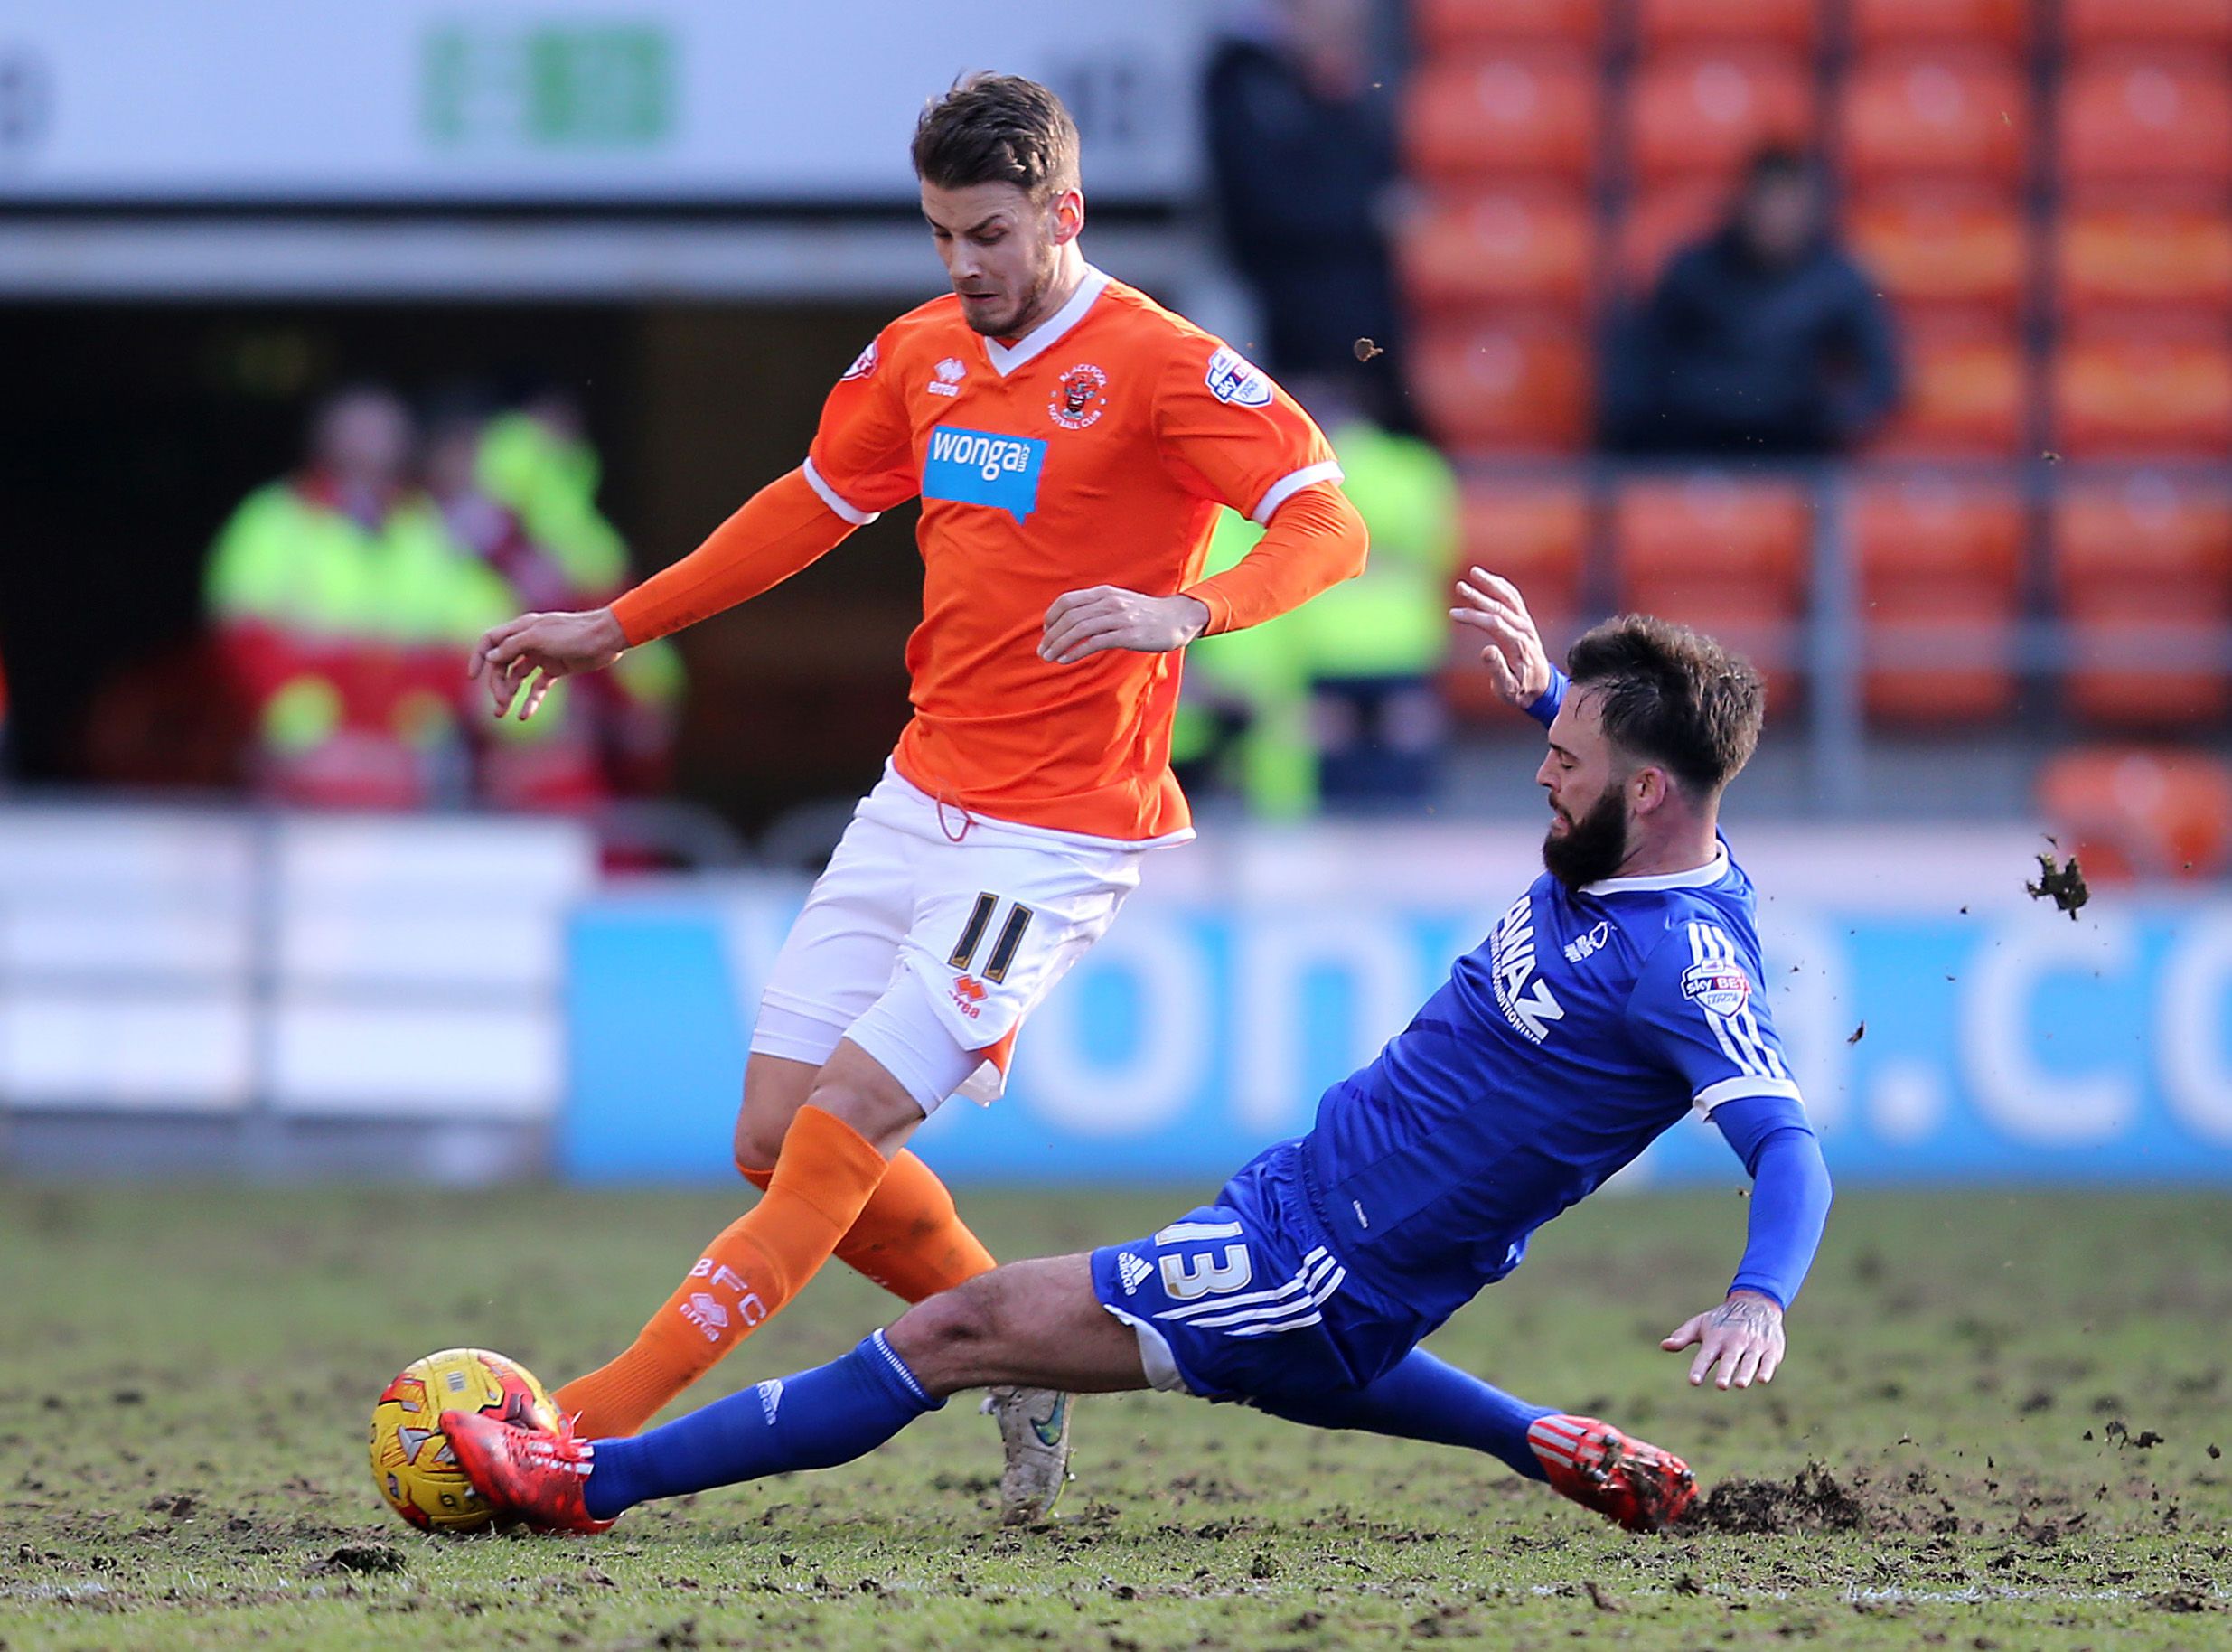 Football - Blackpool v Nottingham Forest - Sky Bet Football League Championship - Bloomfield Road - 14/2/15 
Andrea Orlandi of Blackpool in action with Danny Fox of Nottingham Forest  
Mandatory Credit: Action Images / John Clifton 
Livepic 
EDITORIAL USE ONLY. No use with unauthorized audio, video, data, fixture lists, club/league logos or 